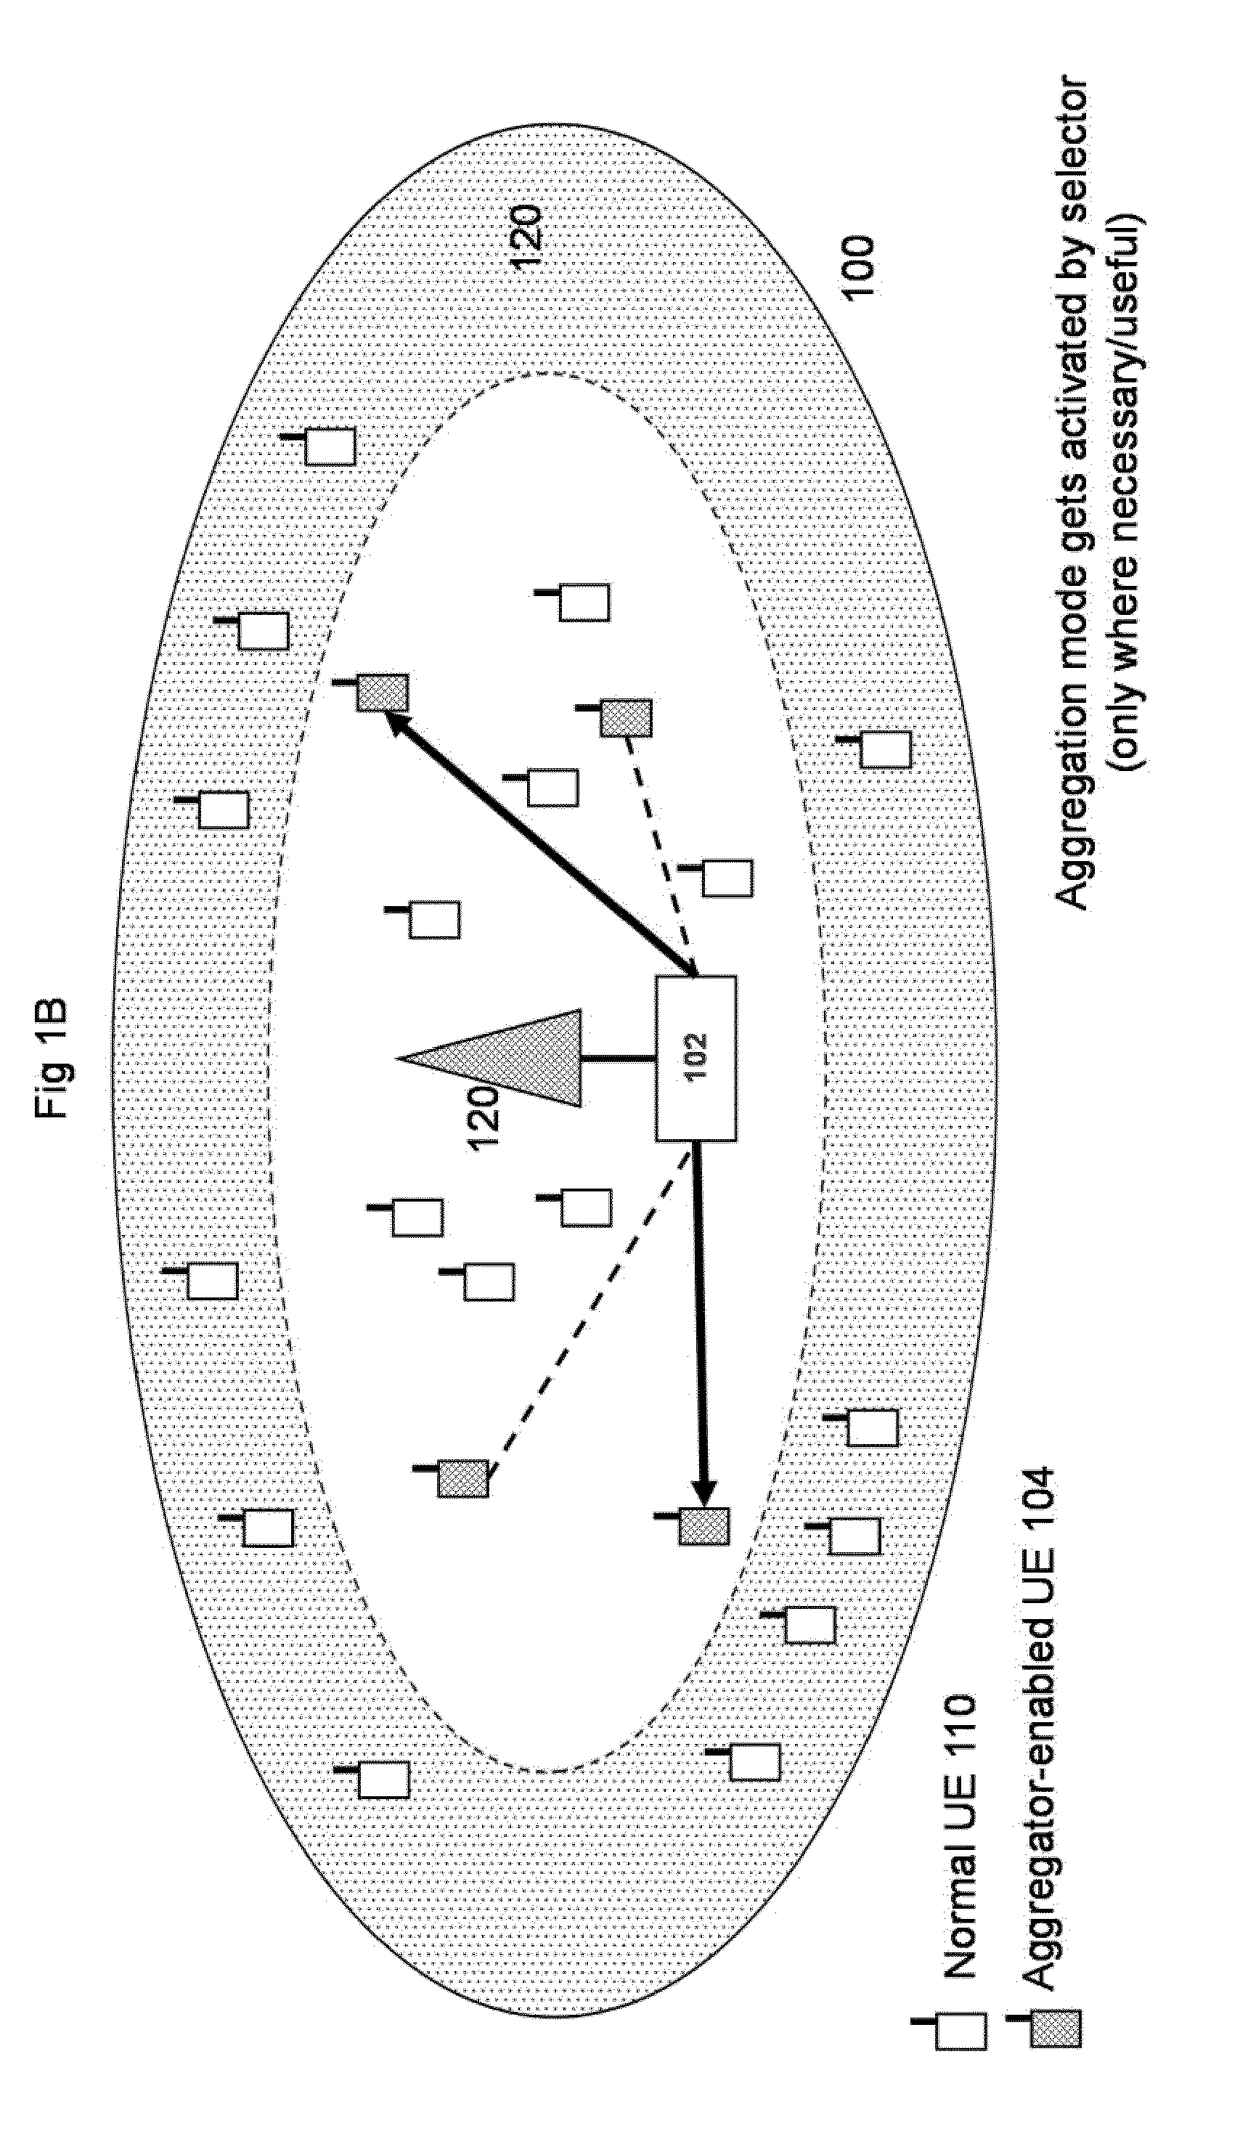 Radio resource management in a telecommunication system